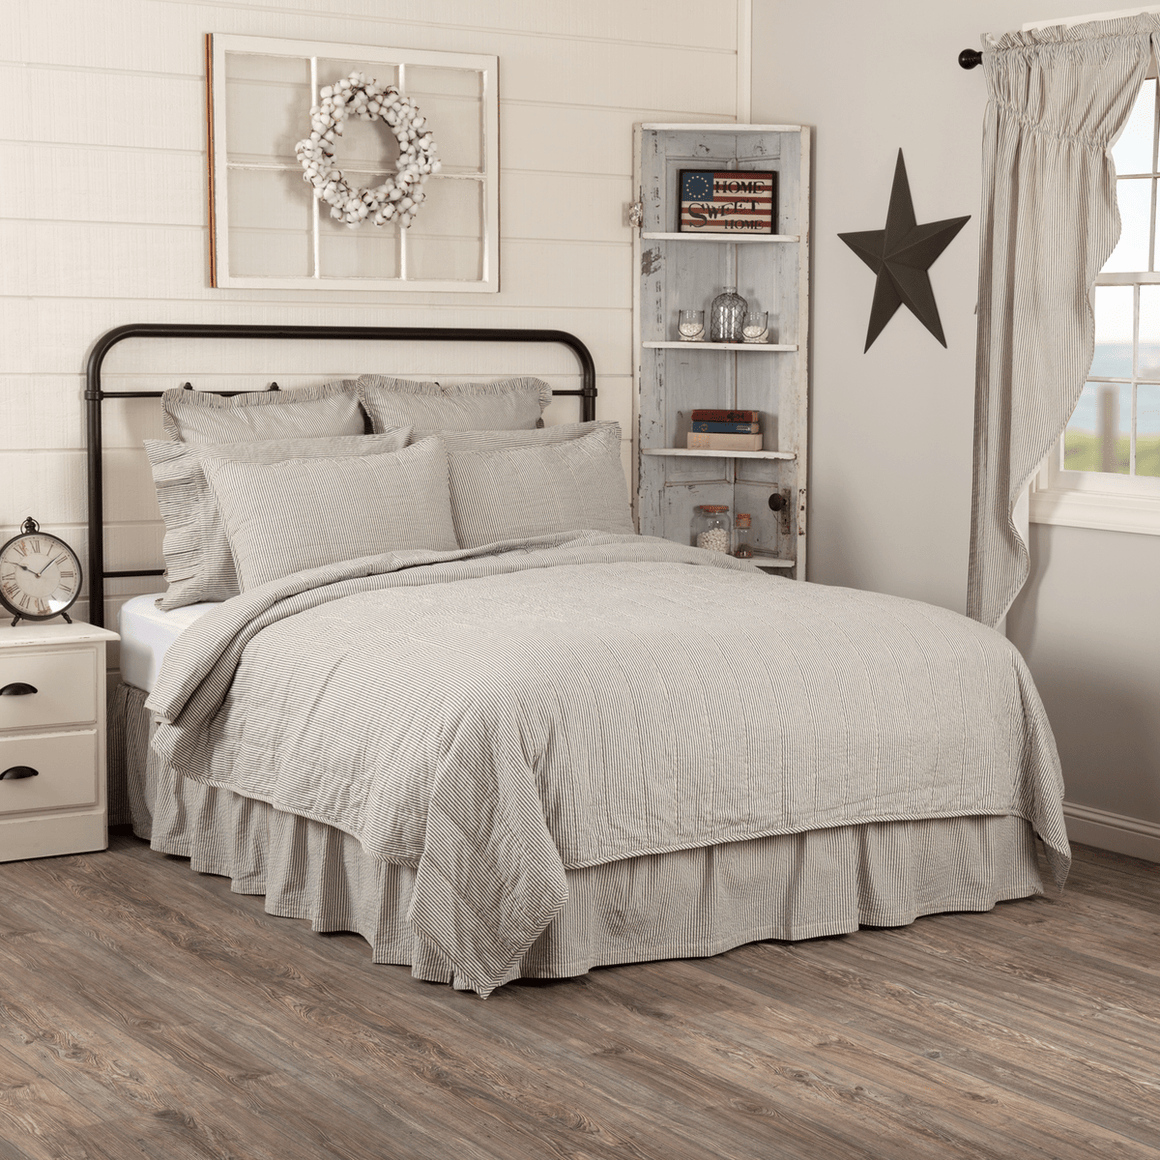 Hatteras Ticking Stripe Quilted Coverlet